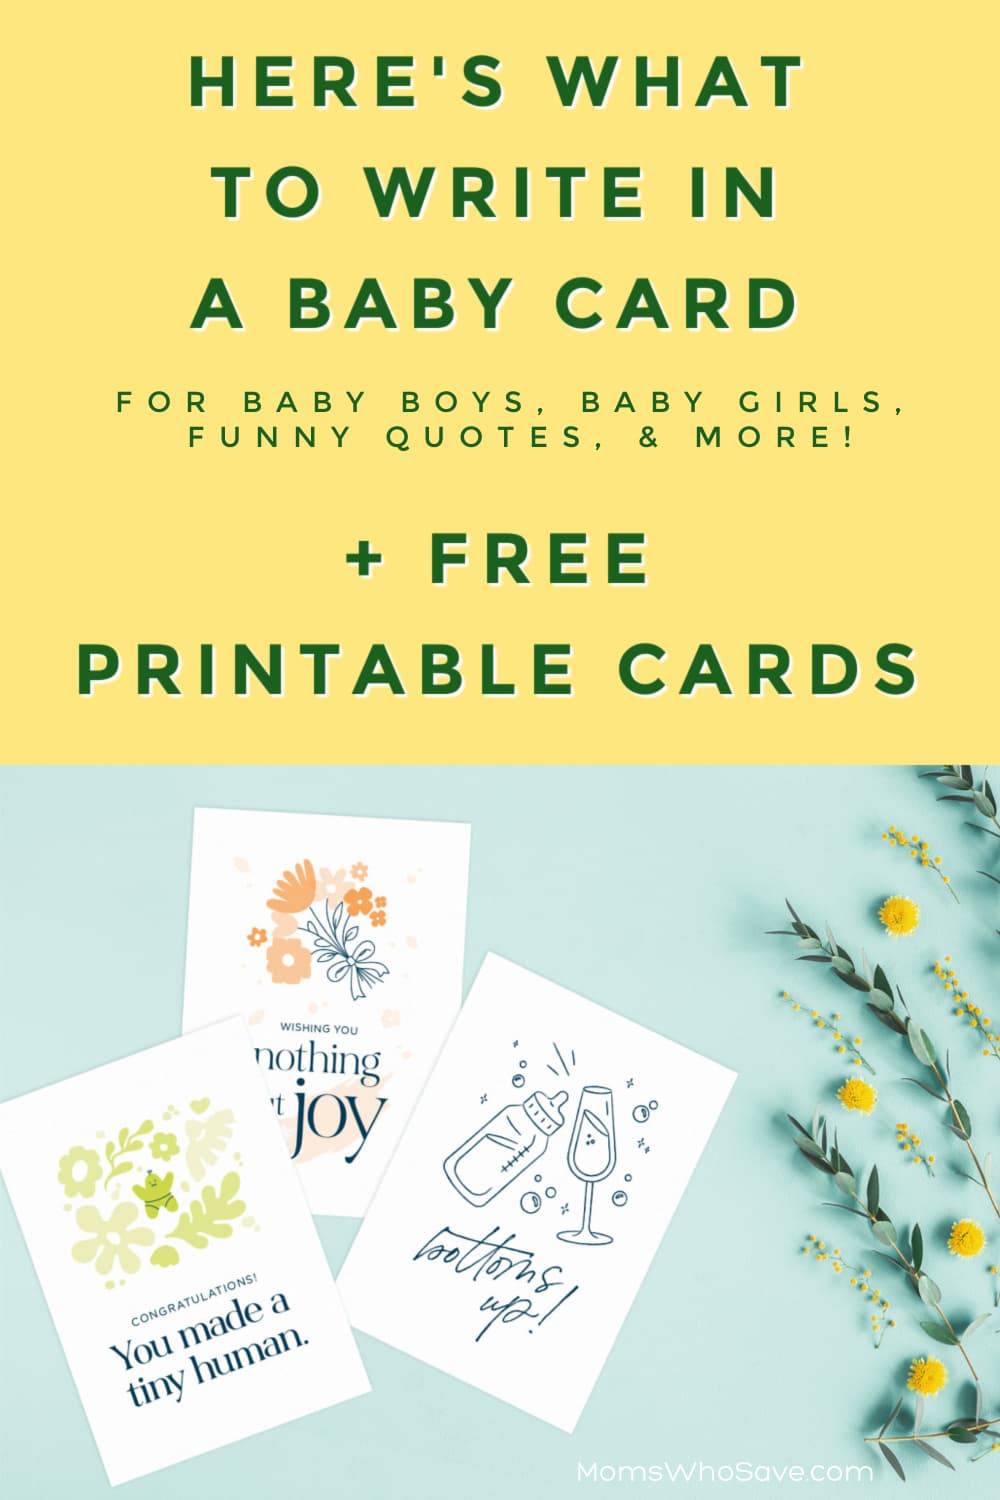 What to Write in a Baby Card